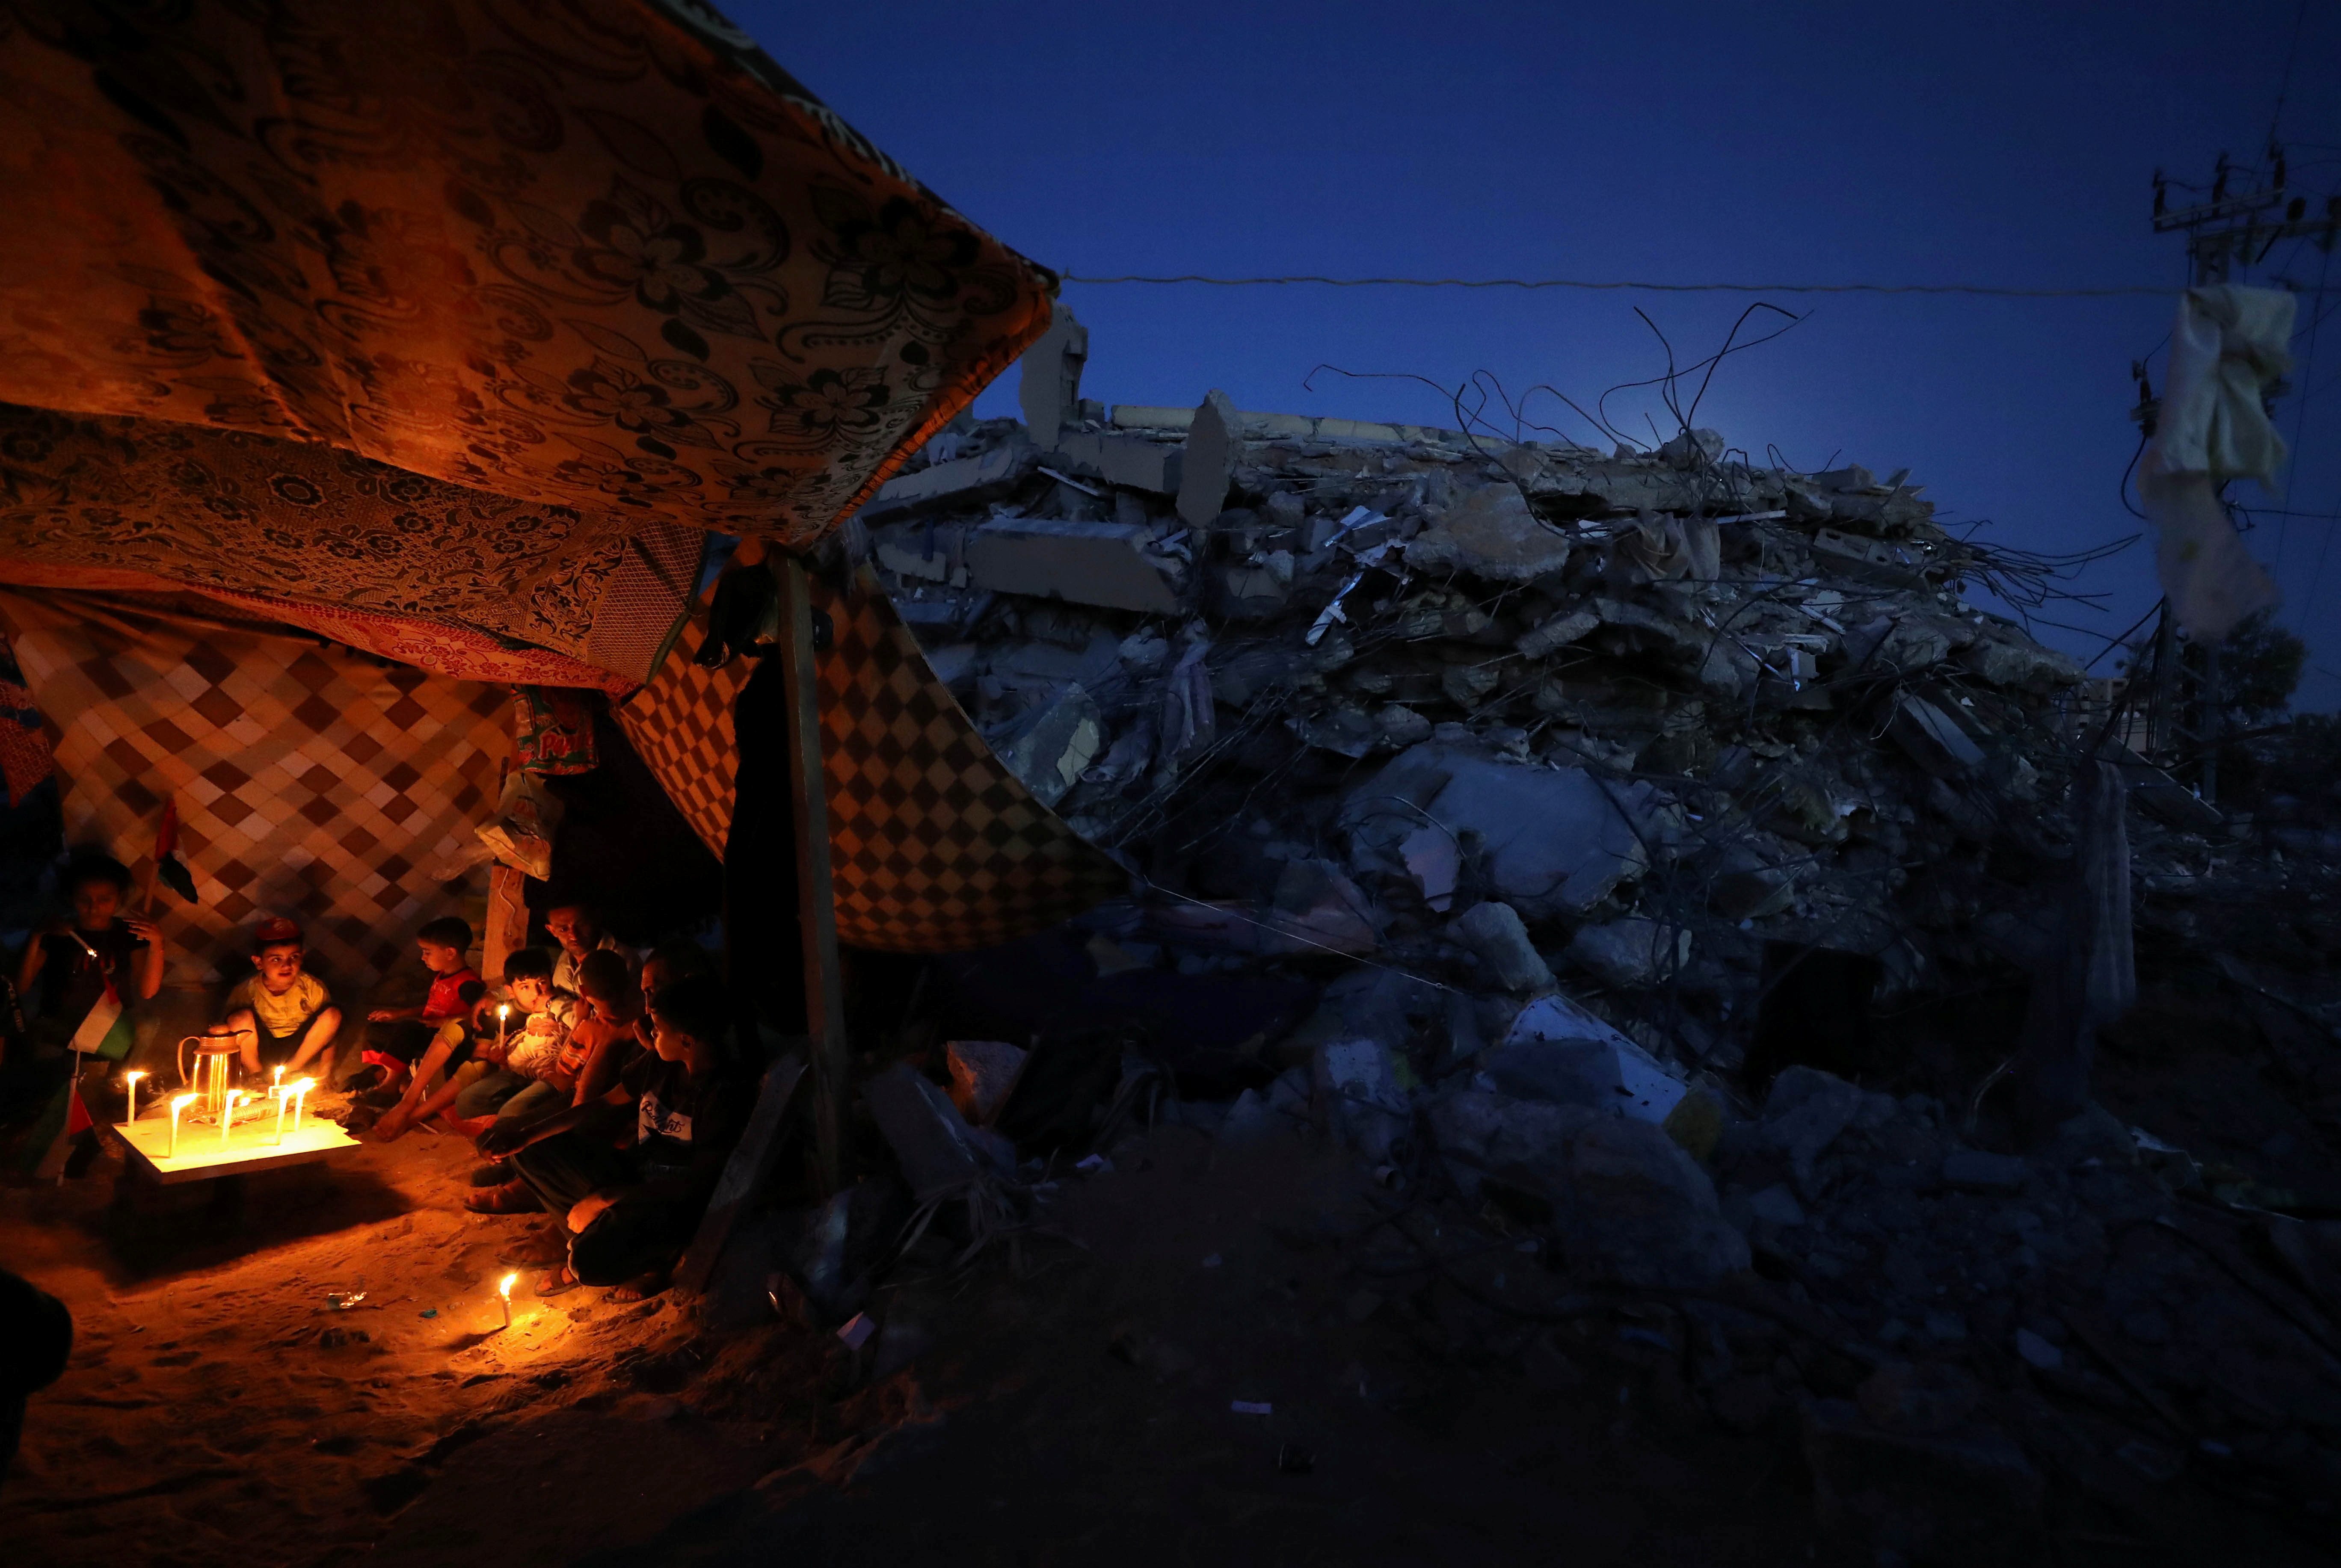 Displaced by Israeli bombs, Gazans camp by rubble of their homes